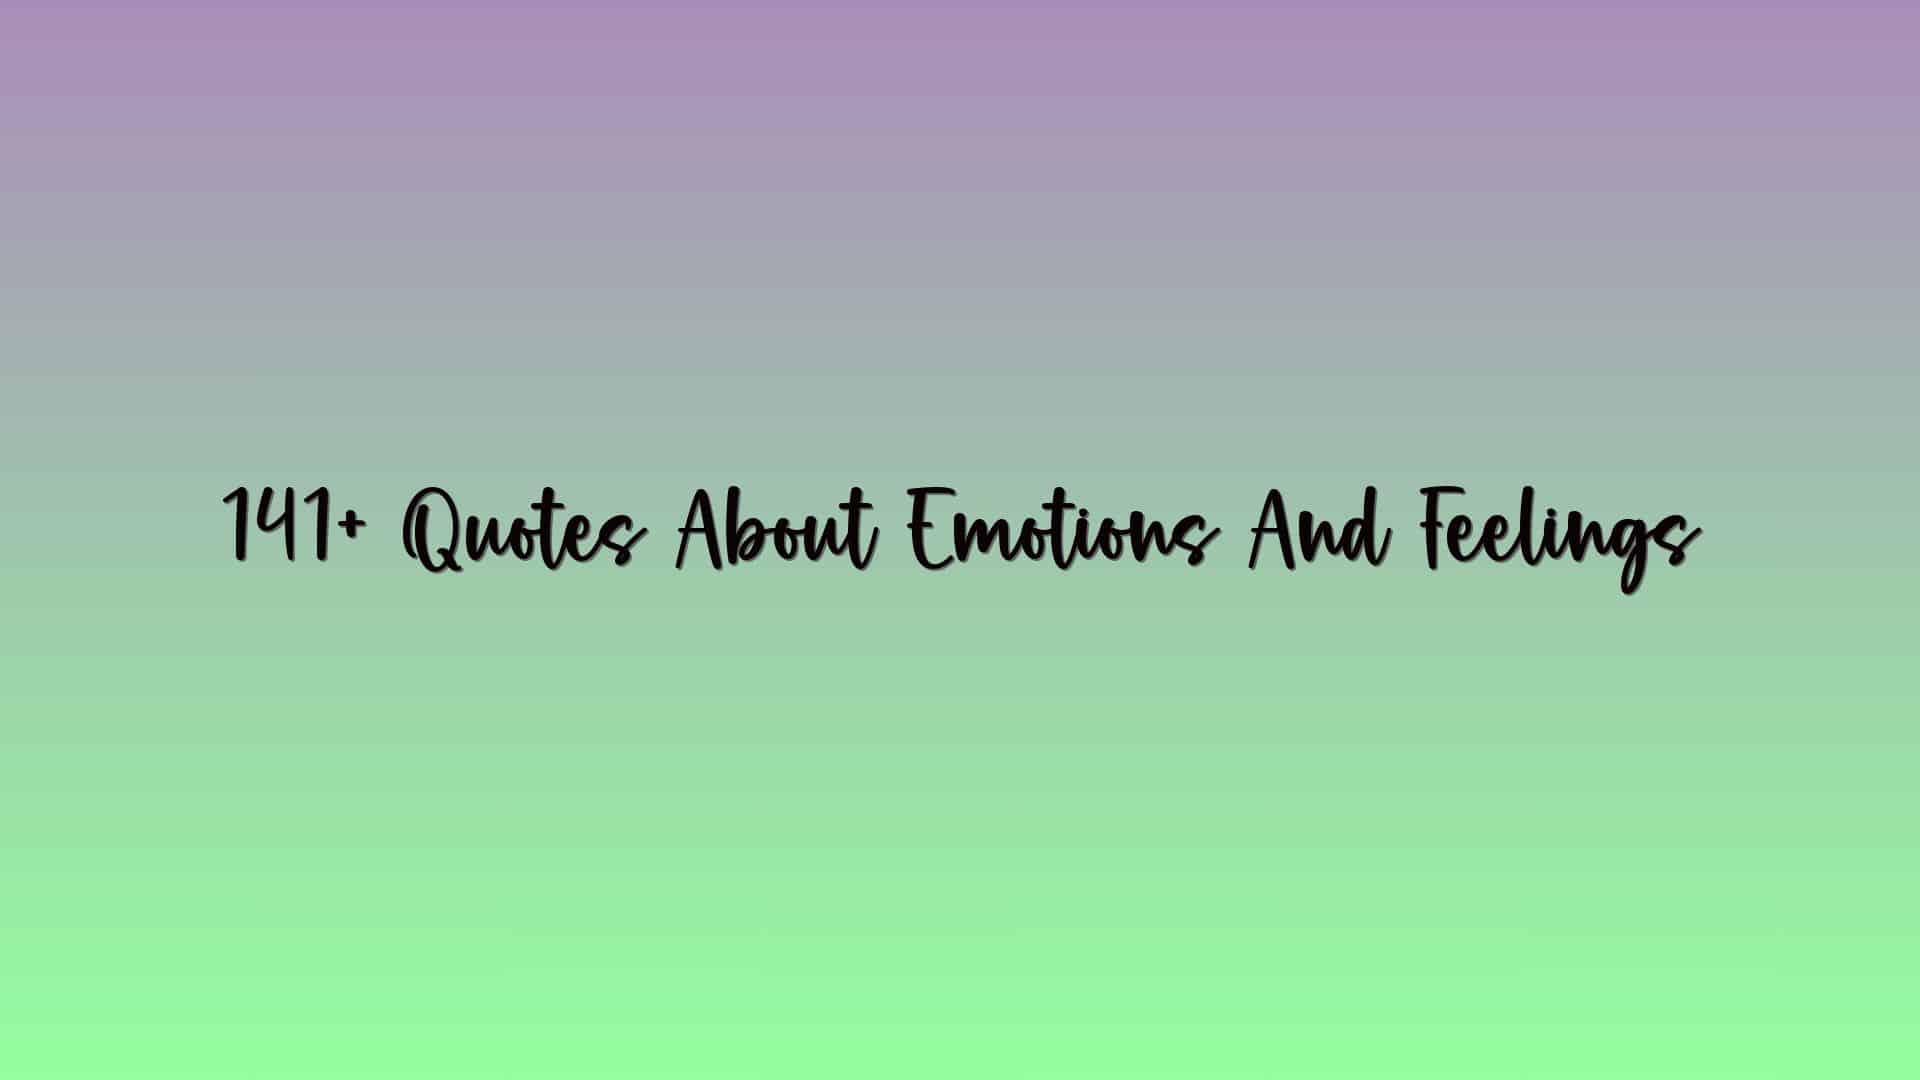 141+ Quotes About Emotions And Feelings